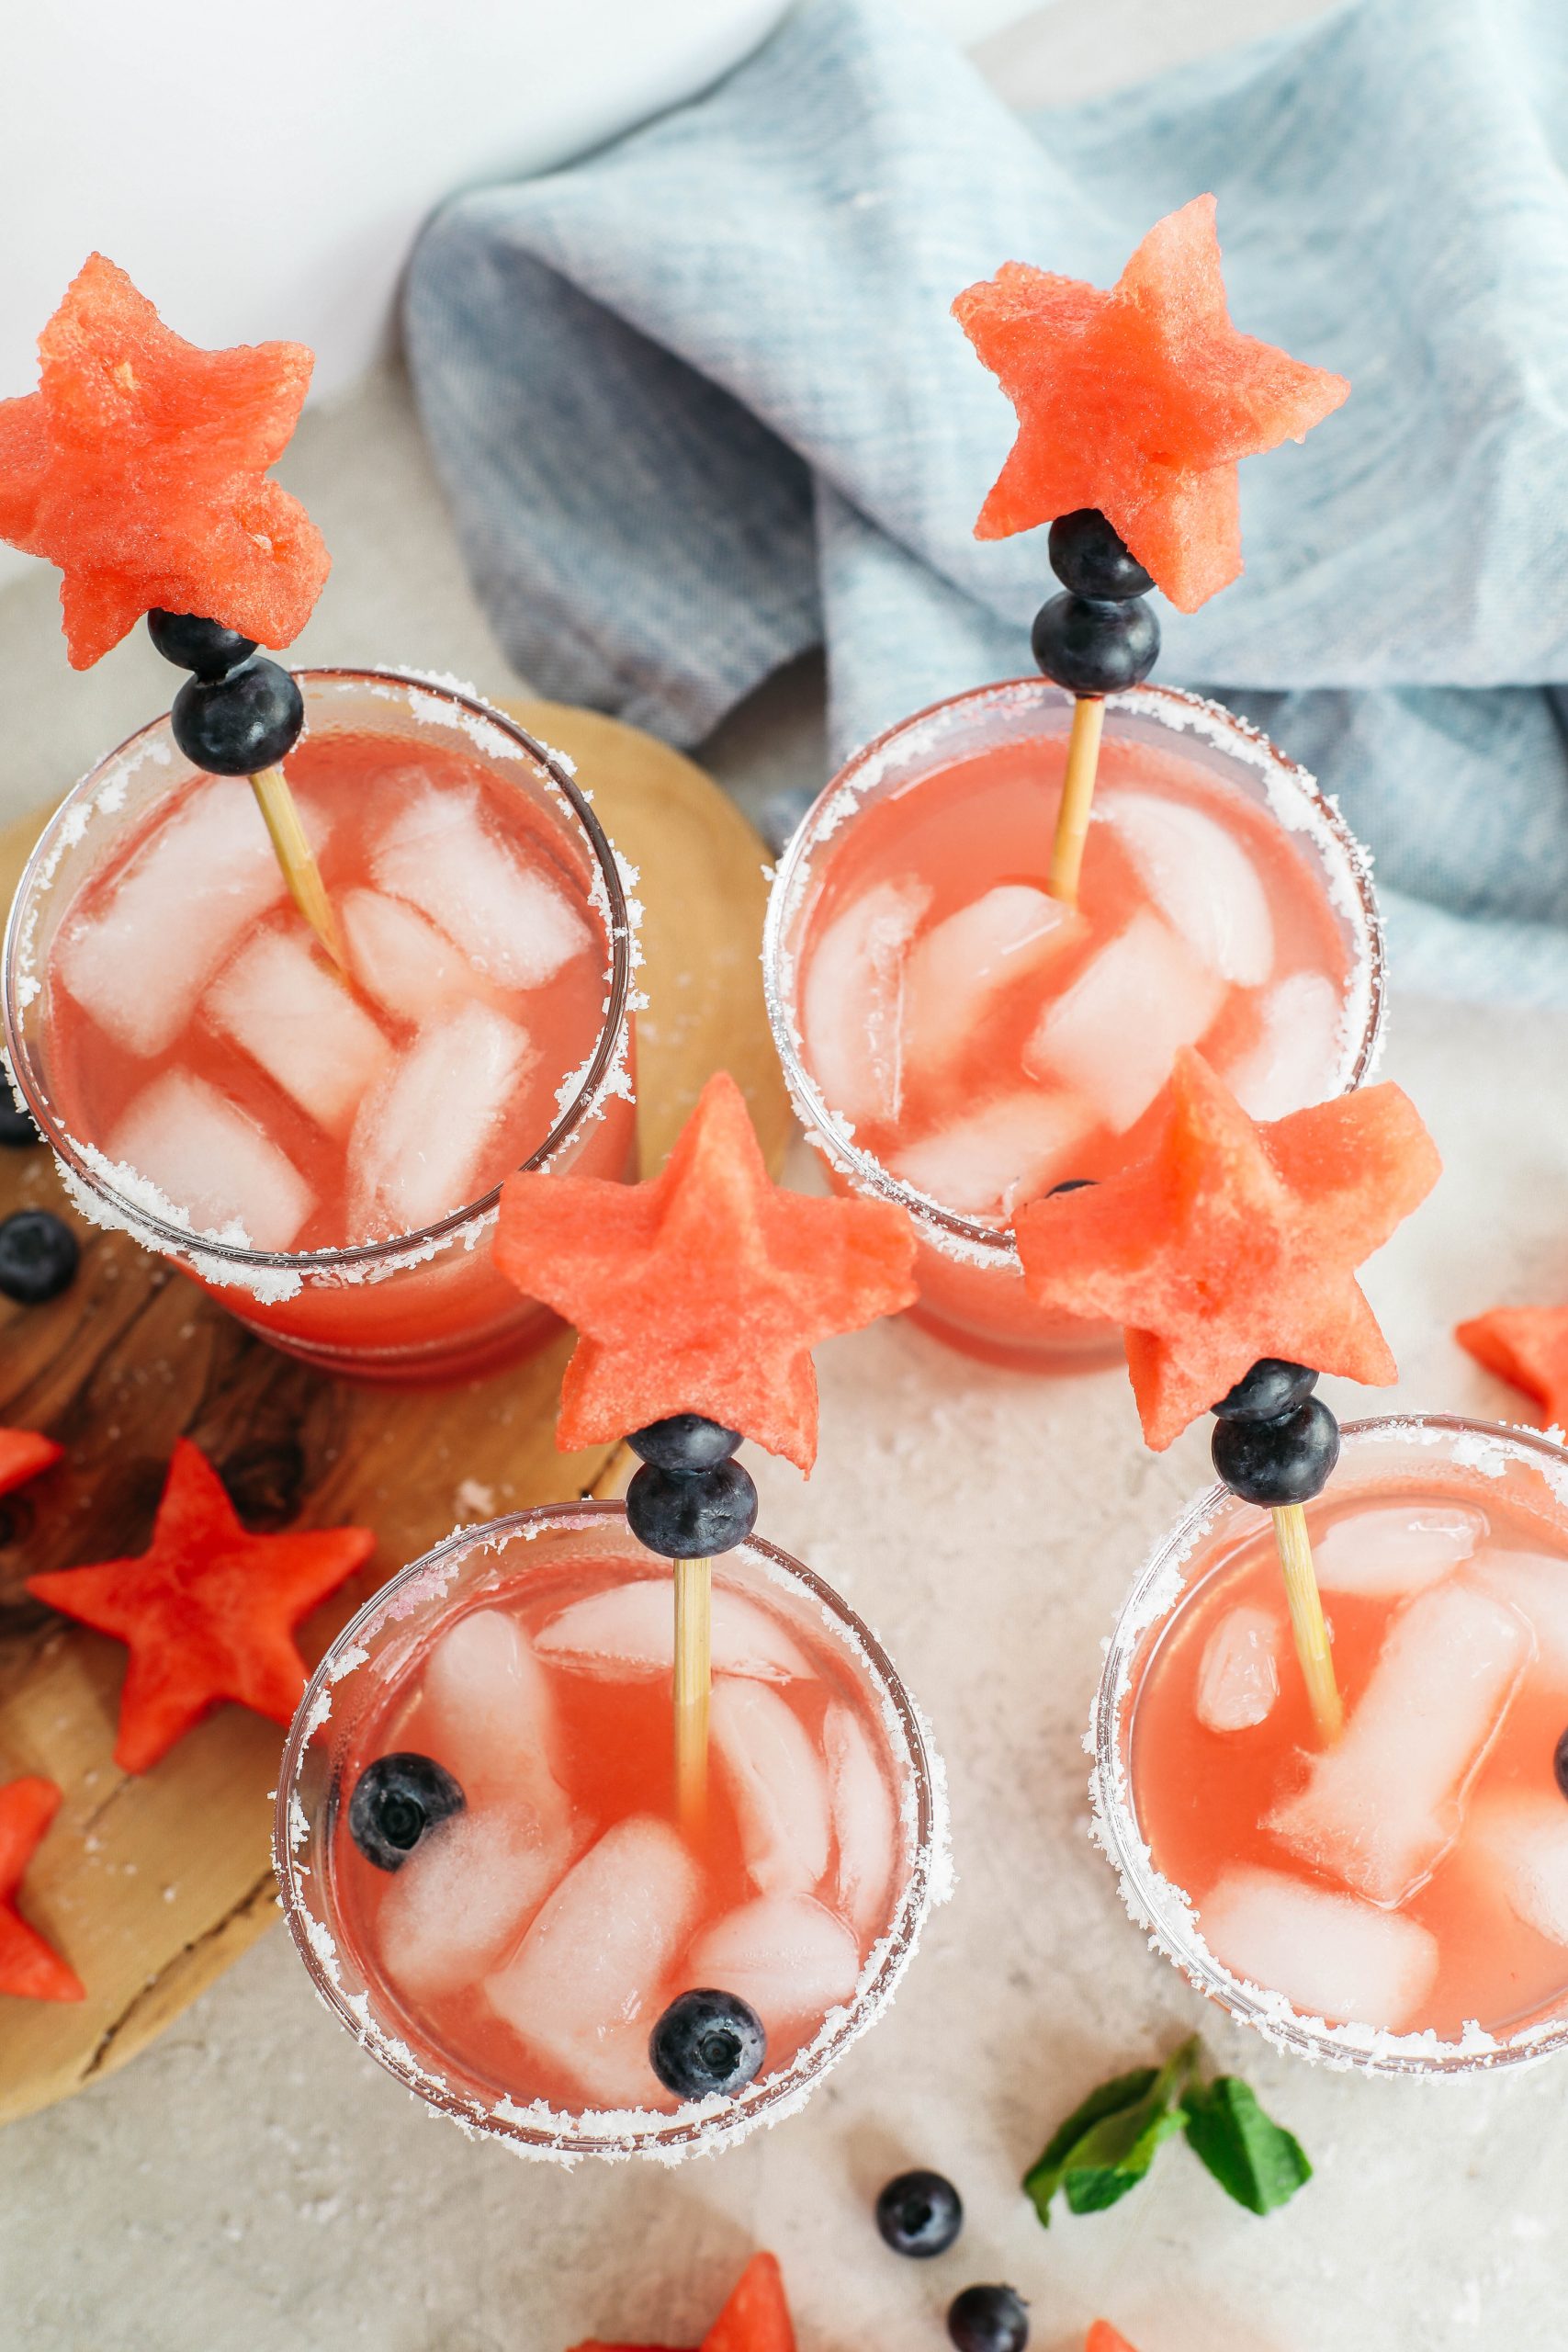 These Fresh Watermelon Margaritas are super easy to make, refreshingly delicious and make the perfect addition to your 4th of July weekend or summer barbecues!